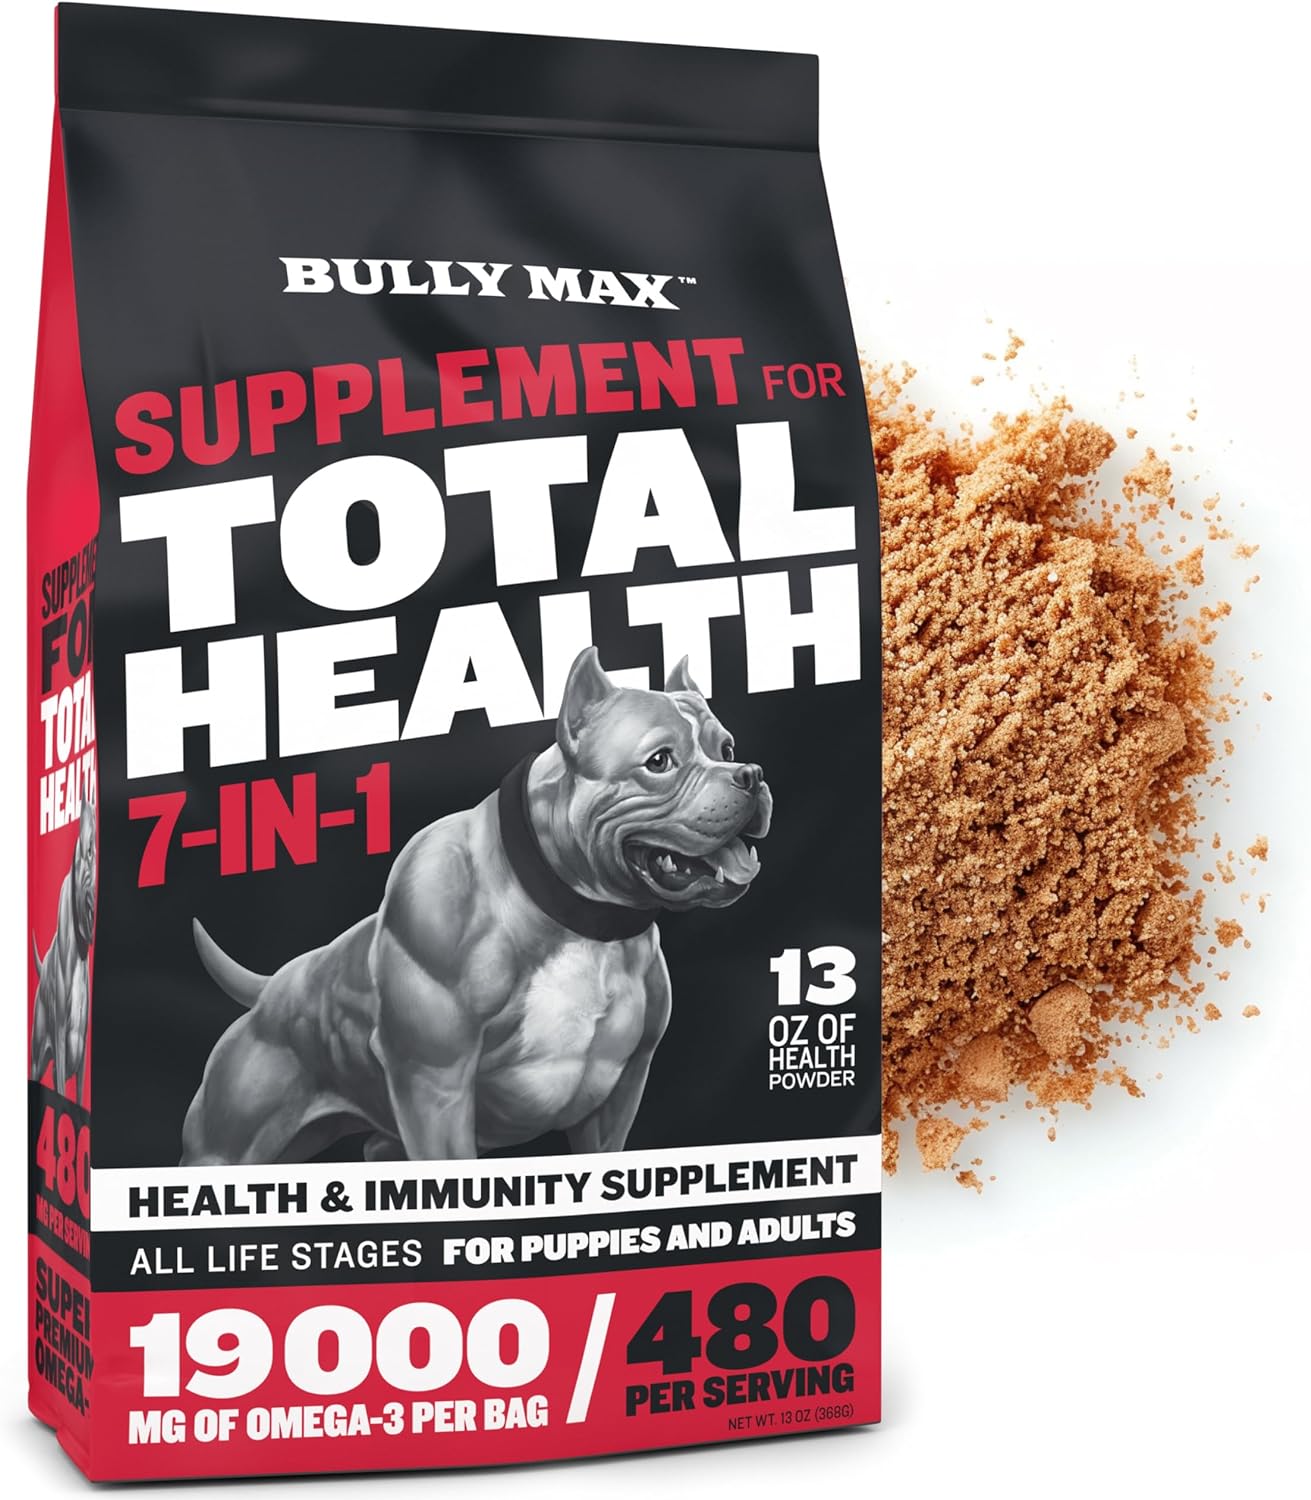 Bully Max 7-in-1 Total Health & Immunity Dog Multivitamin Powder - Puppy & Adult Dog Vitamins - Omega 3 Vitamin Supplements for Immune System, Heart, Joint & Digestive Health for All Breeds, 13 Oz Bag